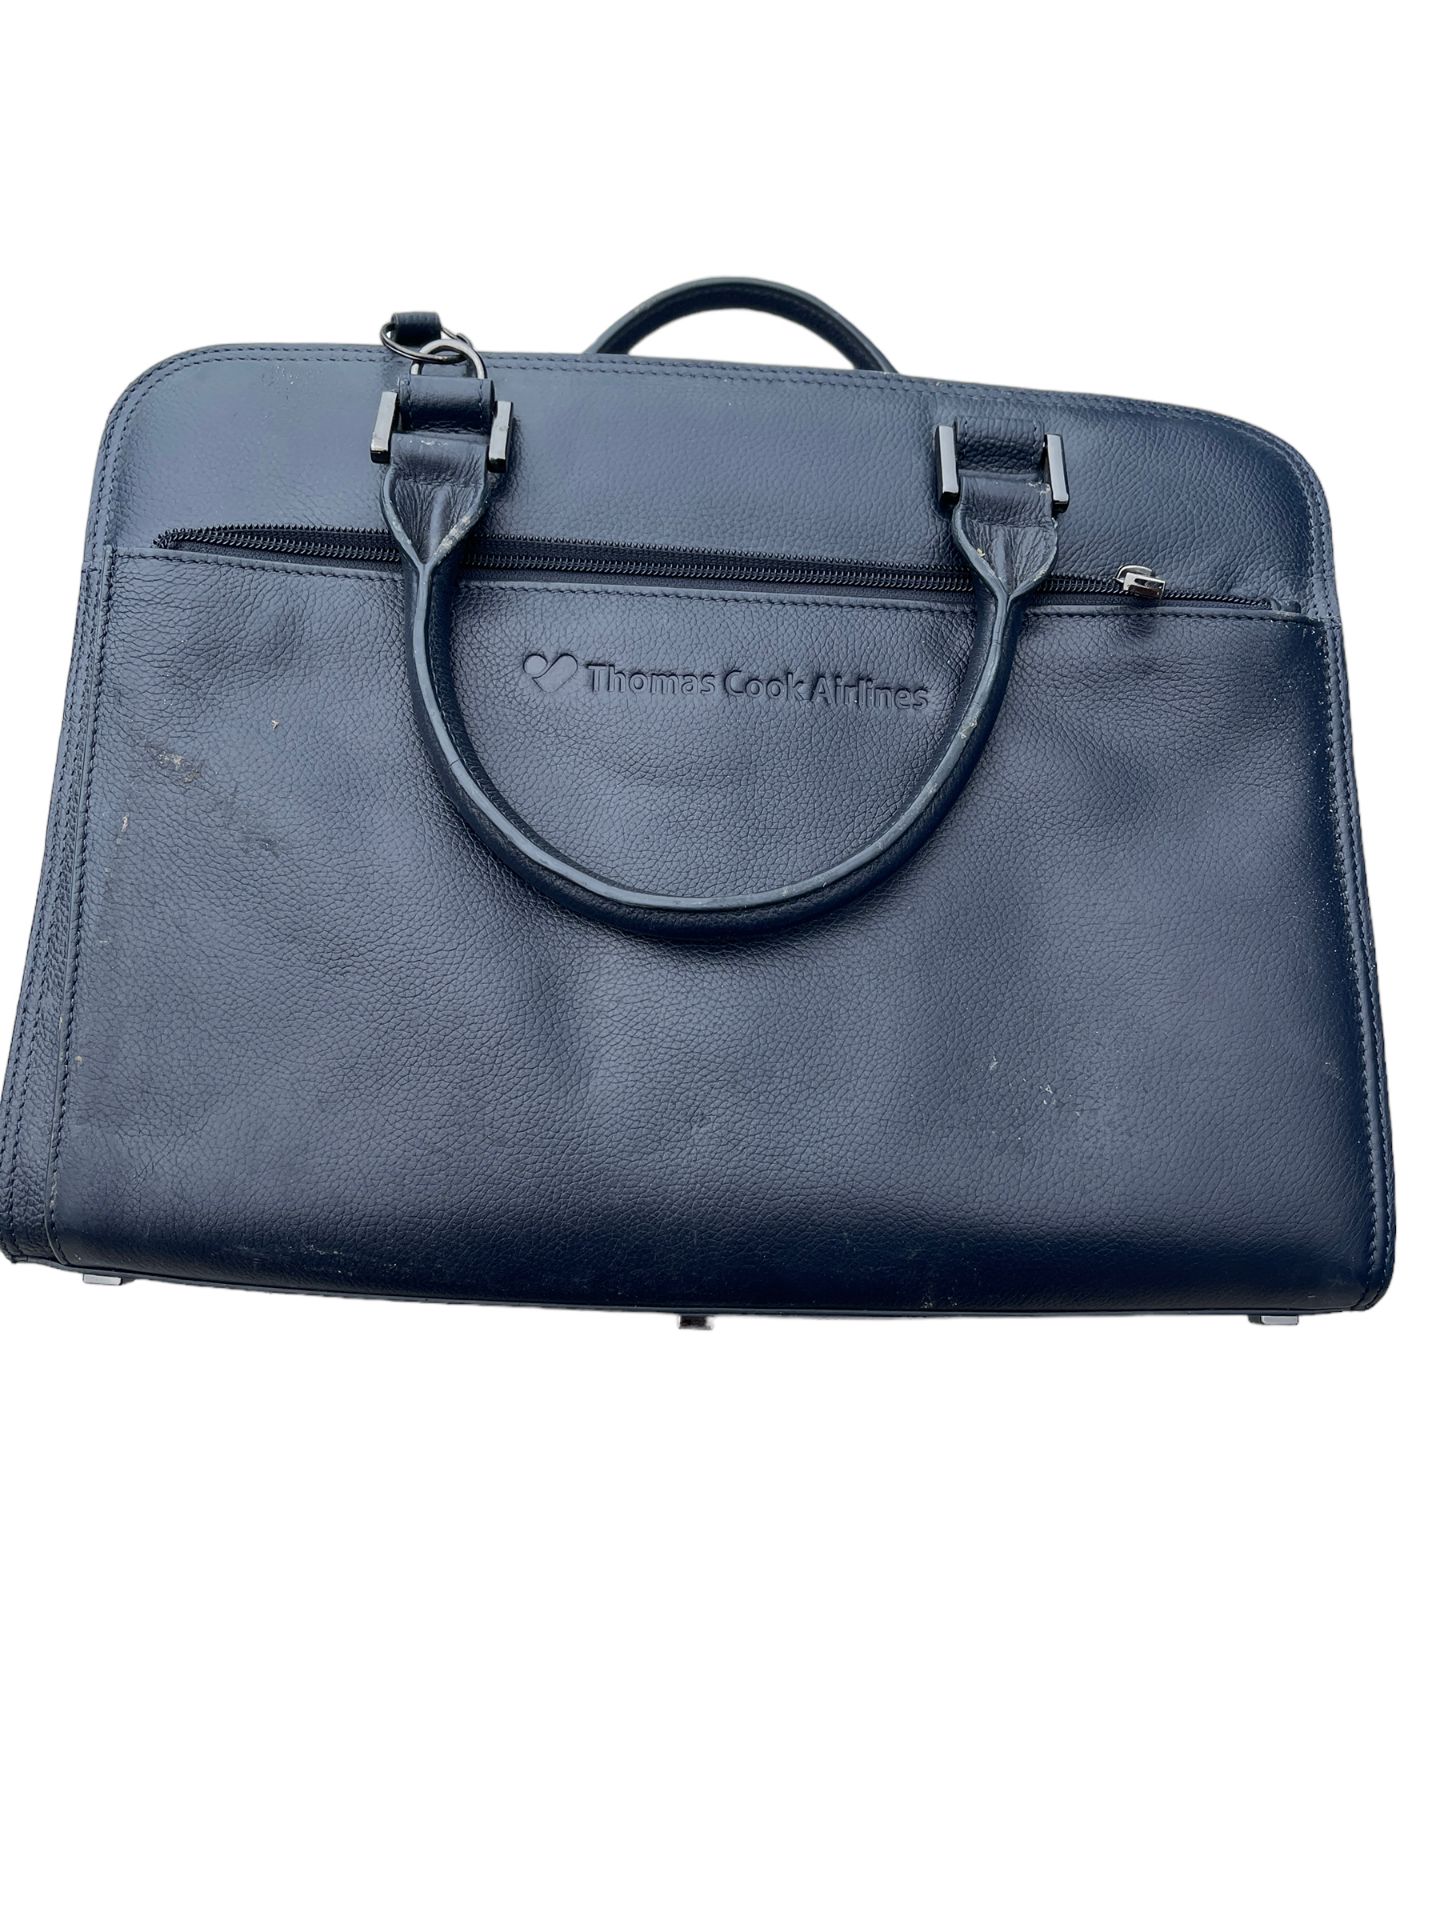 Unclaimed crew luggage bag with contents of Thomson Airways leather